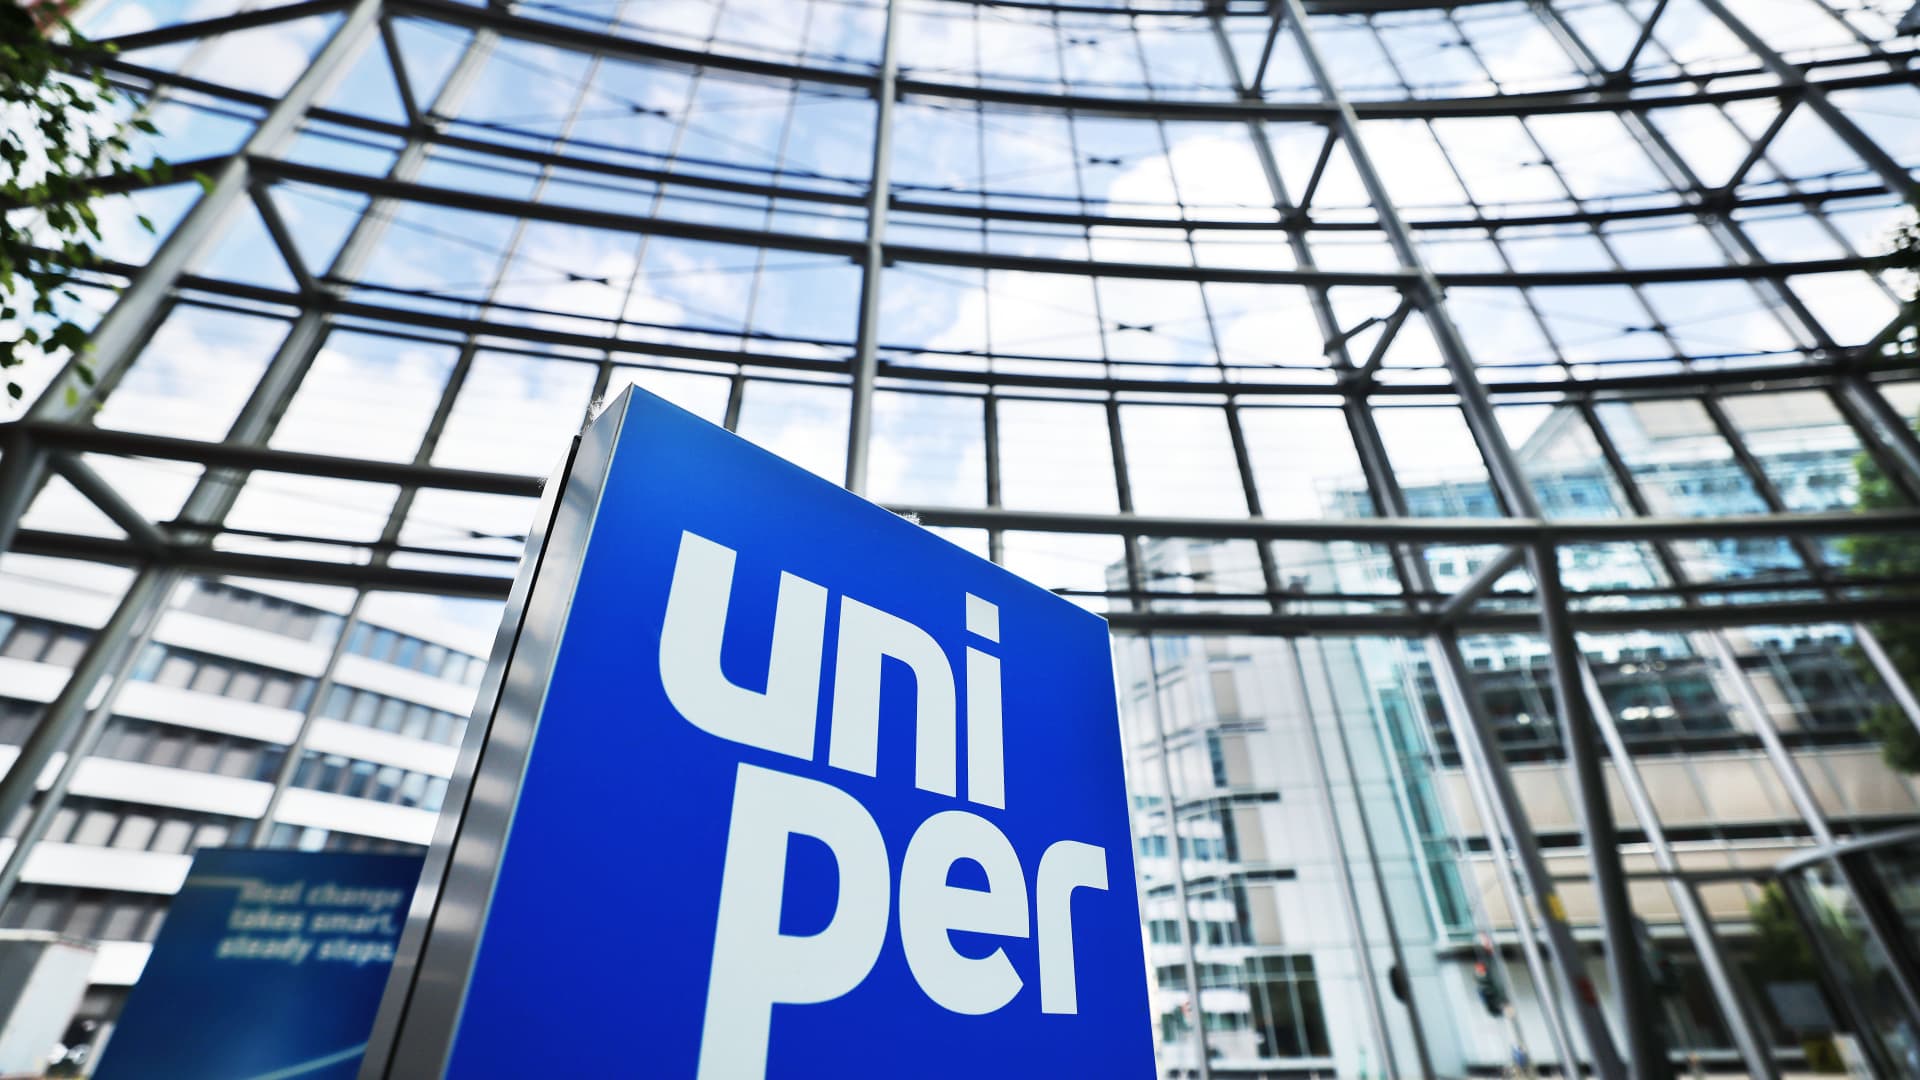 German government agrees nationalization deal for energy giant Uniper